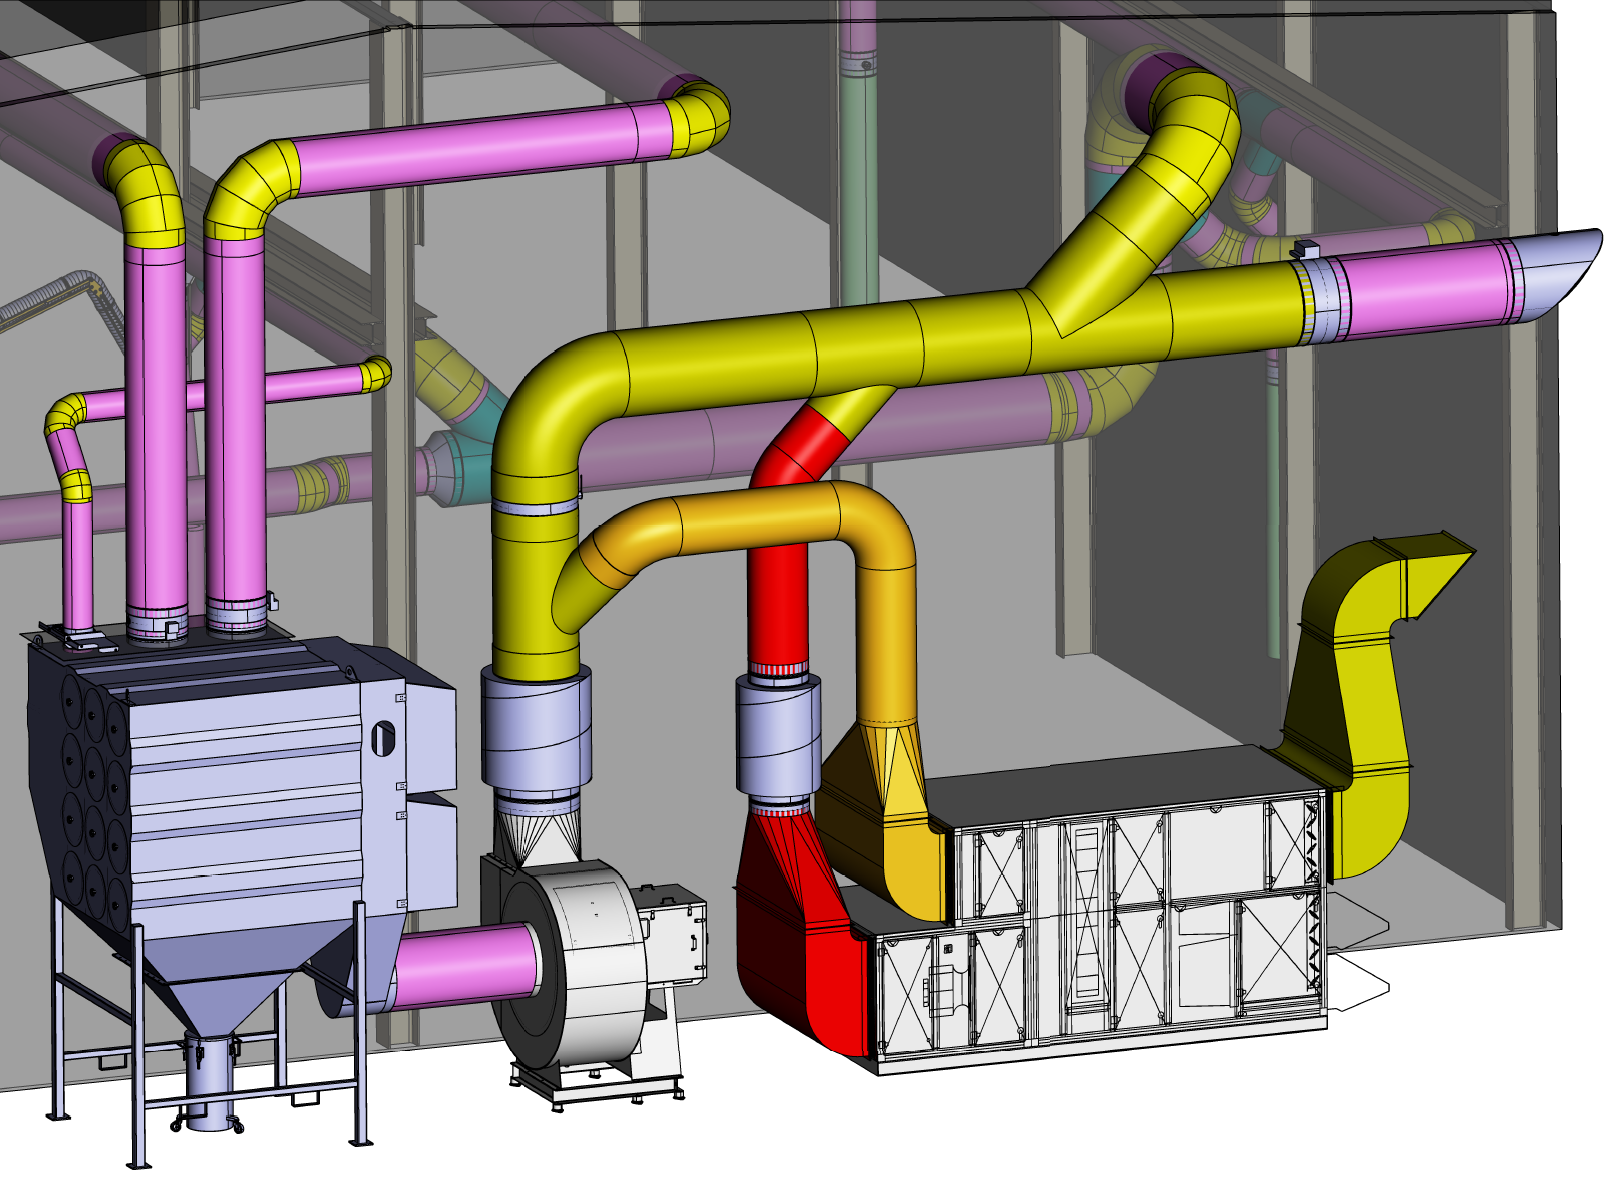 Technical drawing heat recovery in an exhaust system